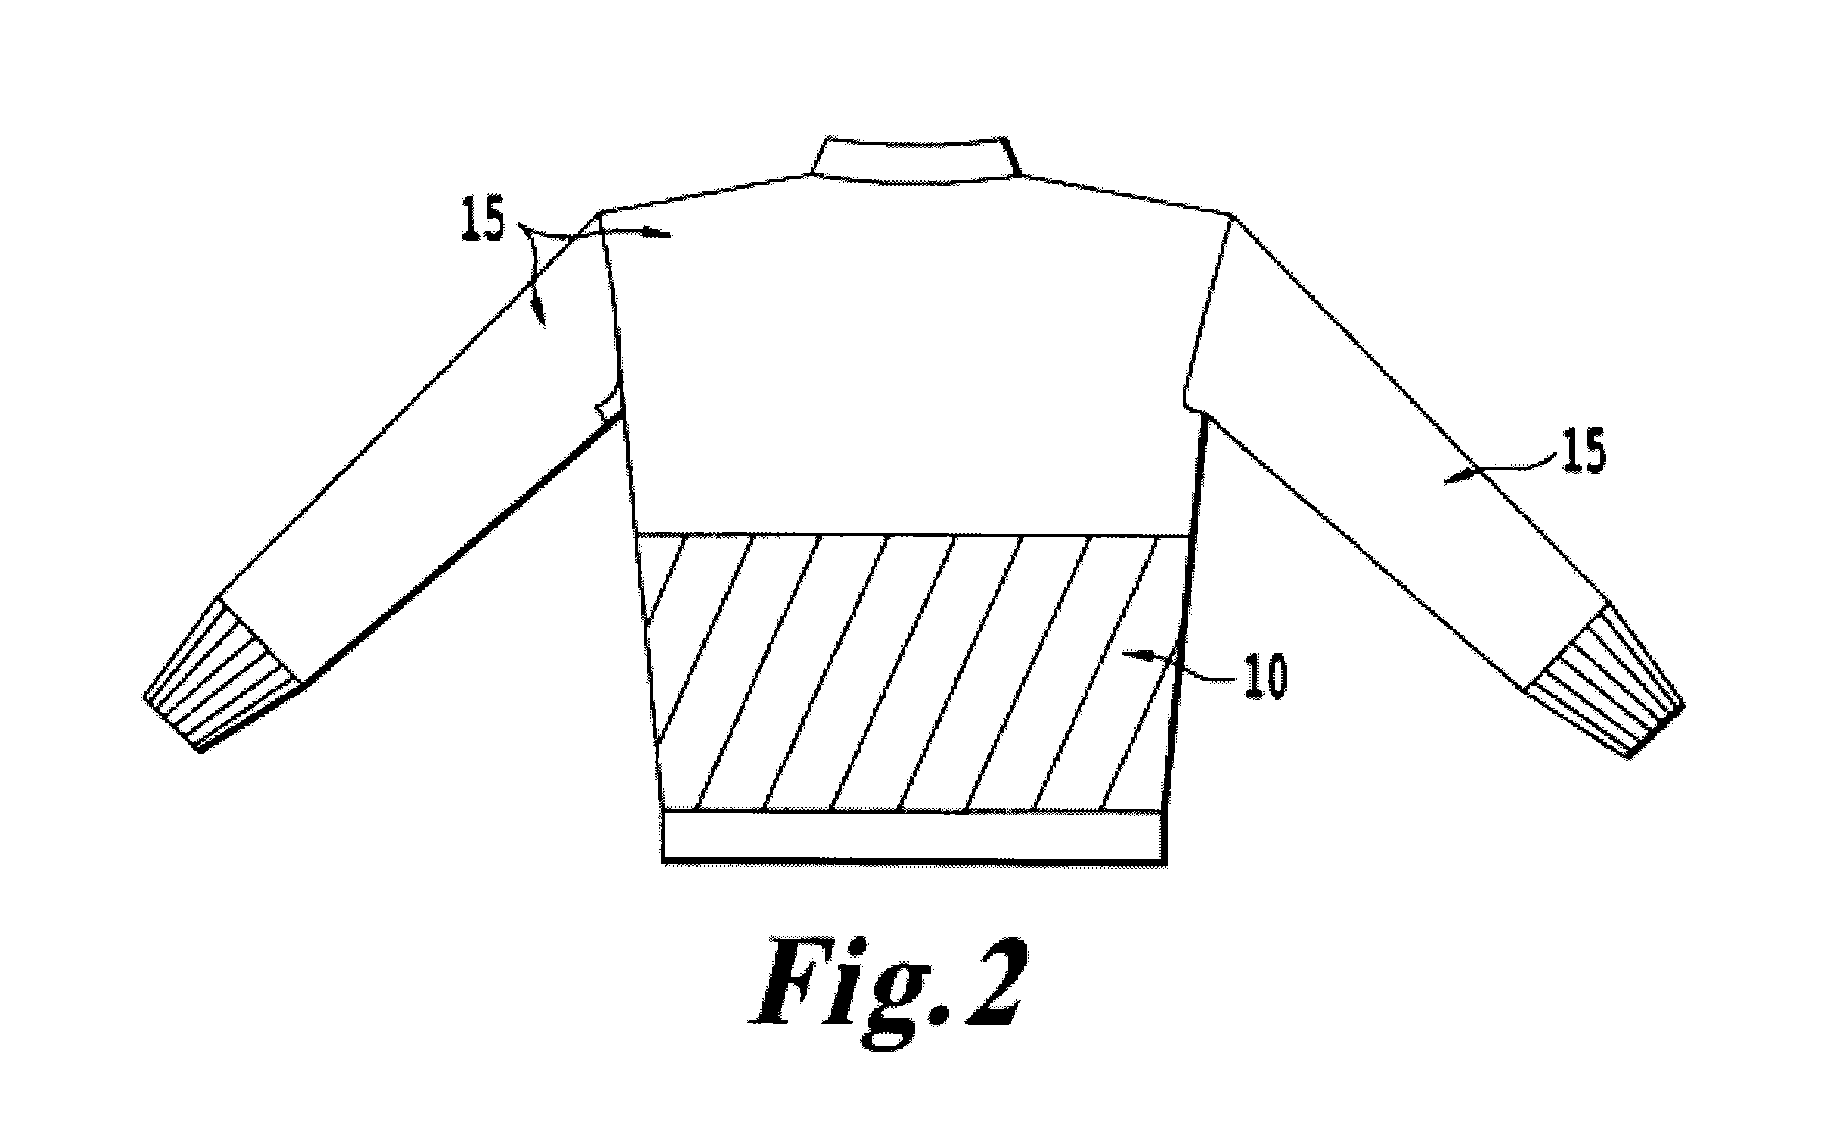 Stab resistant knit fabric having ballistic resistance made with layered modified knit structure and soft body armor construction containing the same